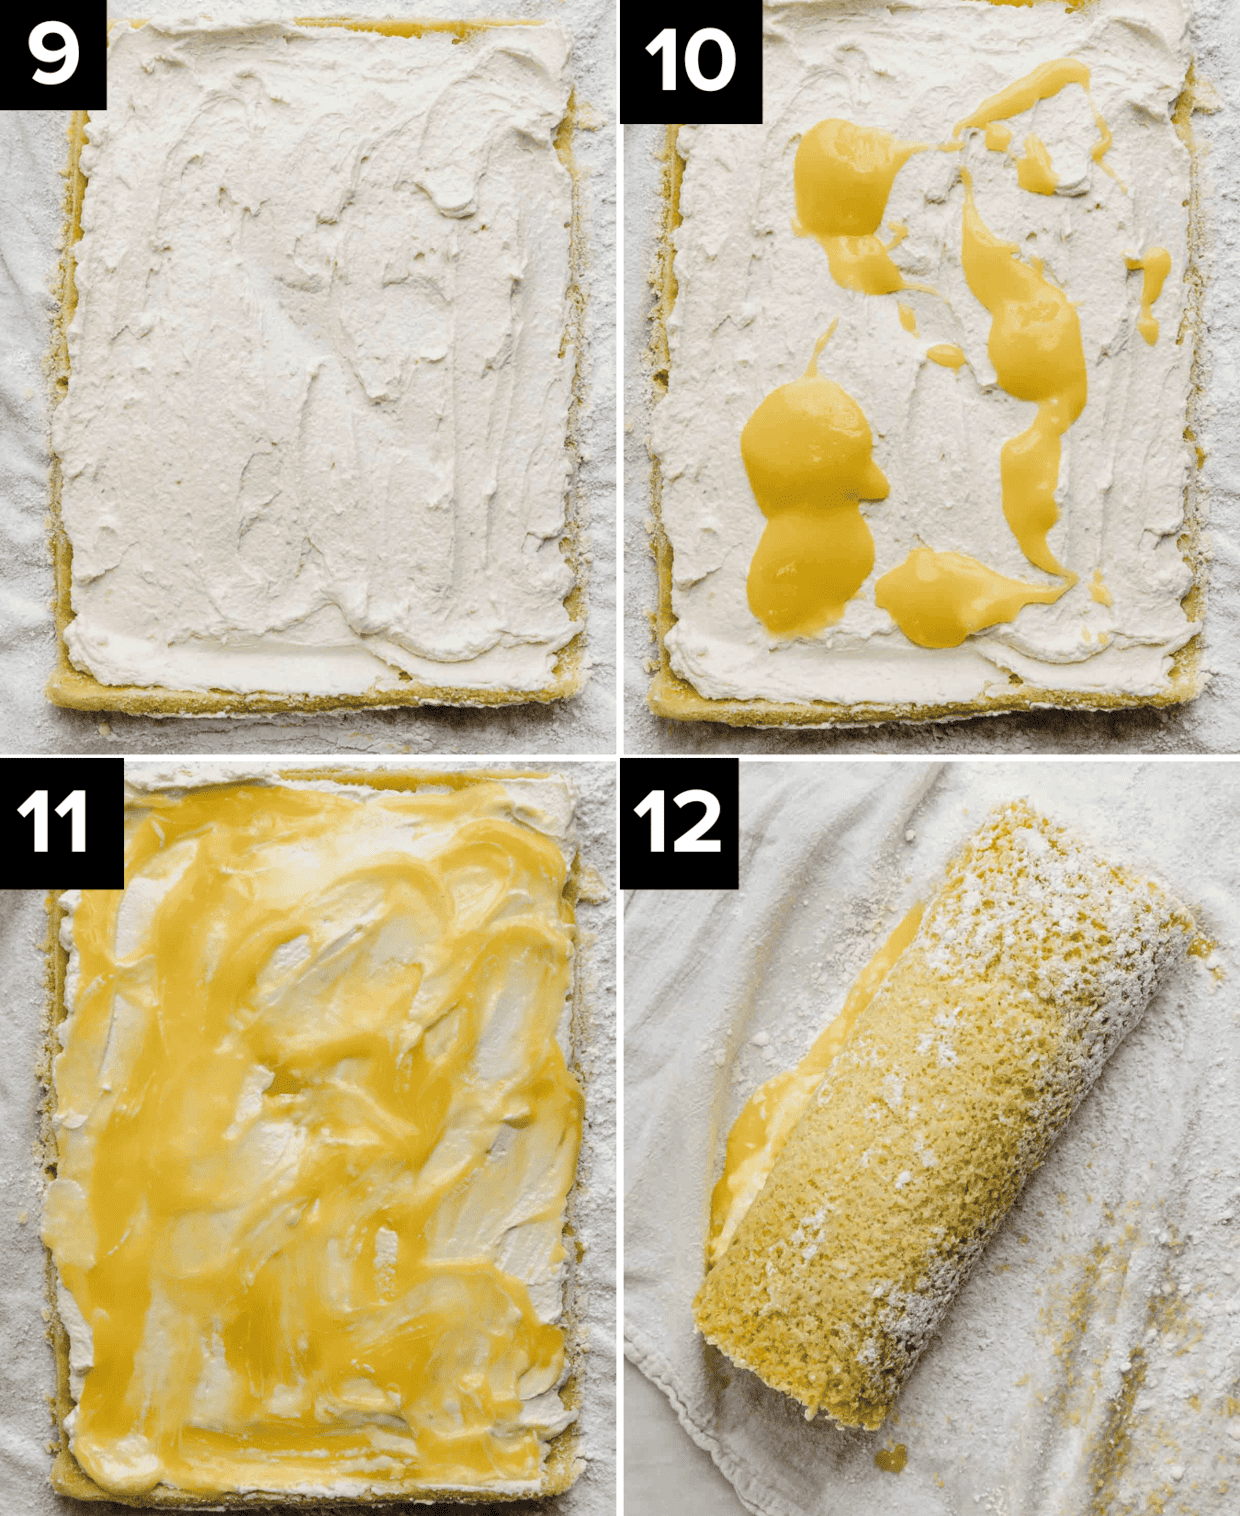 Four images showing the process or filling a yellow lemon Swiss roll with cream and fresh lemon curd.